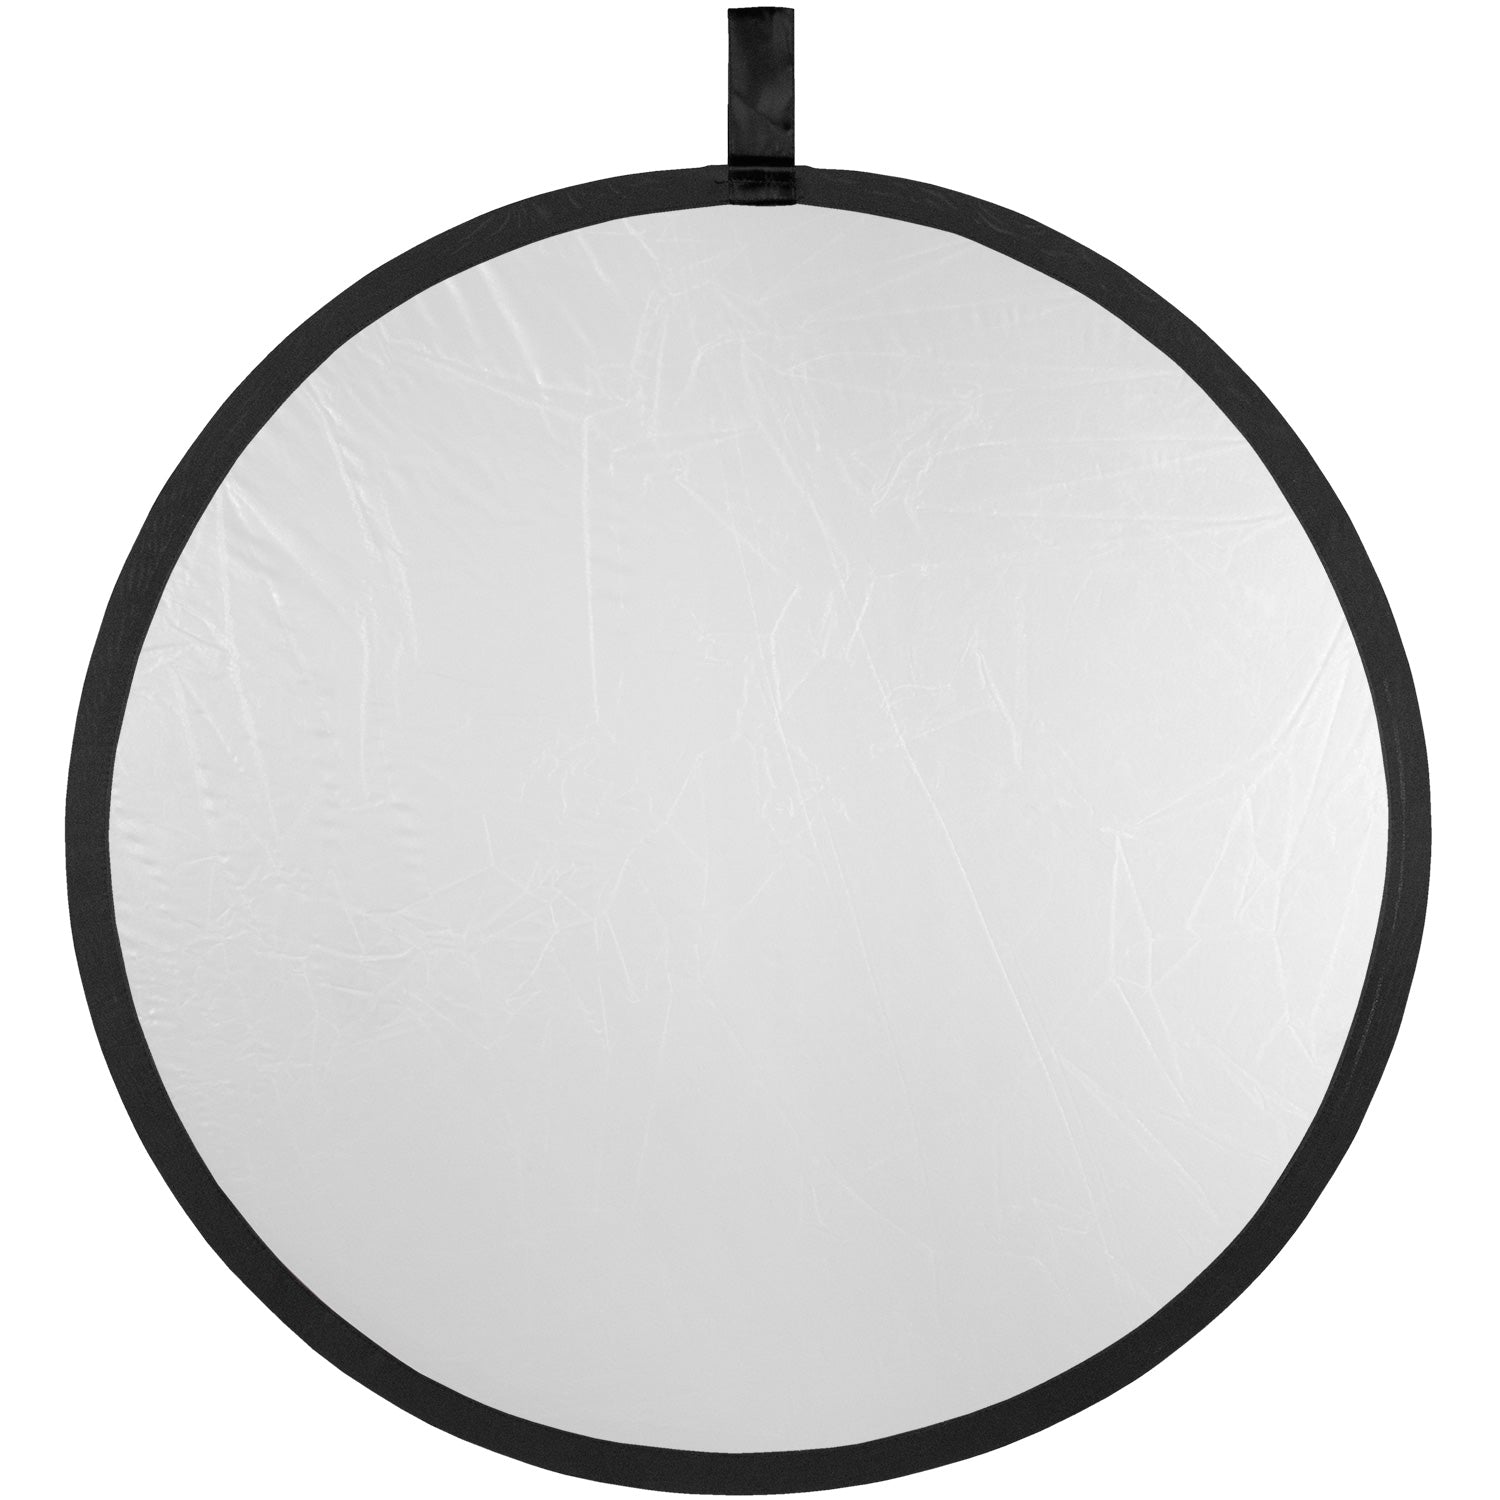 Collapsible 2-in-1 Sunlight/White Bounce Reflector (30)